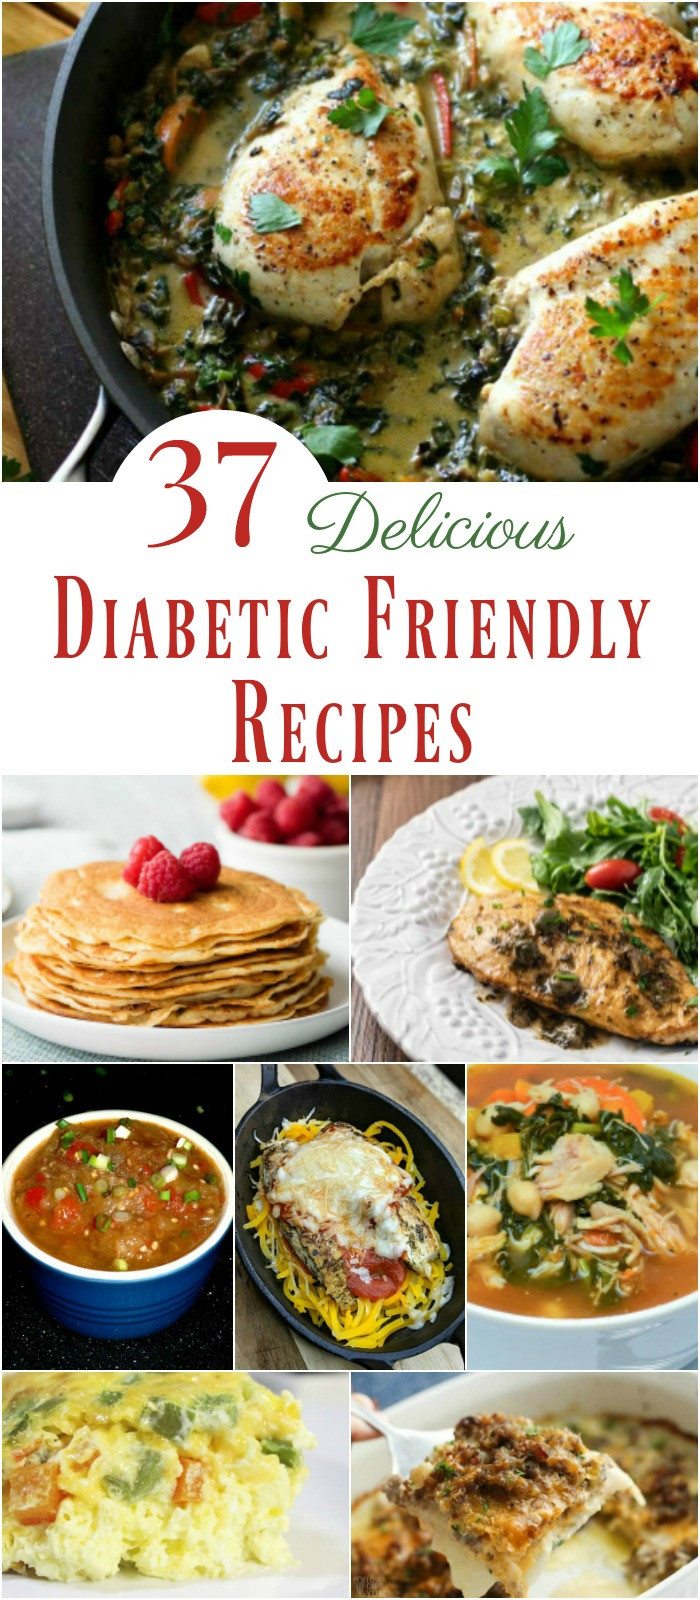 Diabetic Friendly Recipes
 37 Delicious Diabetic Friendly Recipes for a Healthy Meal